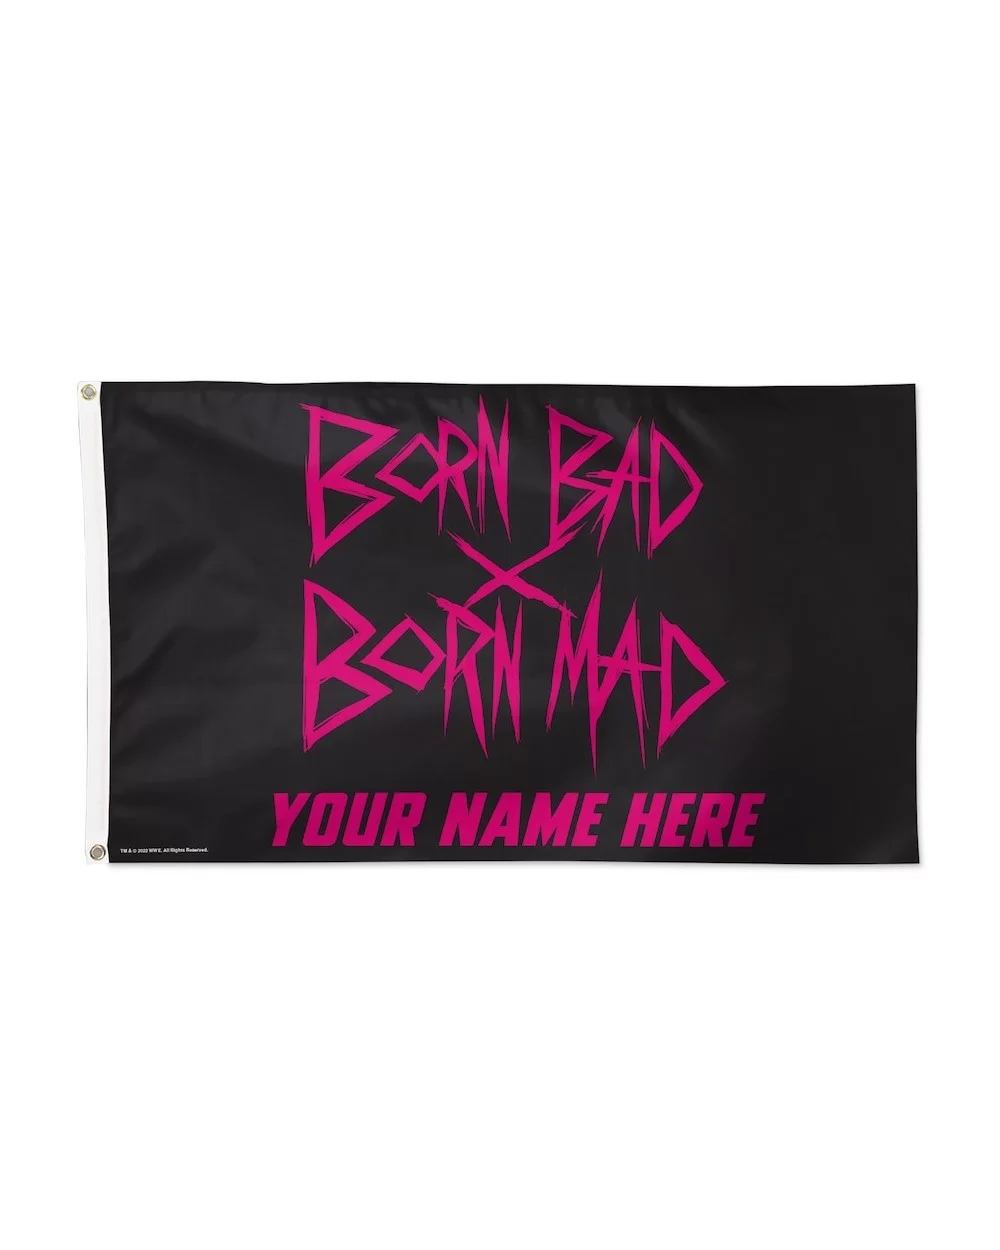 WinCraft Alexa Bliss 3' x 5' One-Sided Deluxe Personalized Flag $13.20 Home & Office